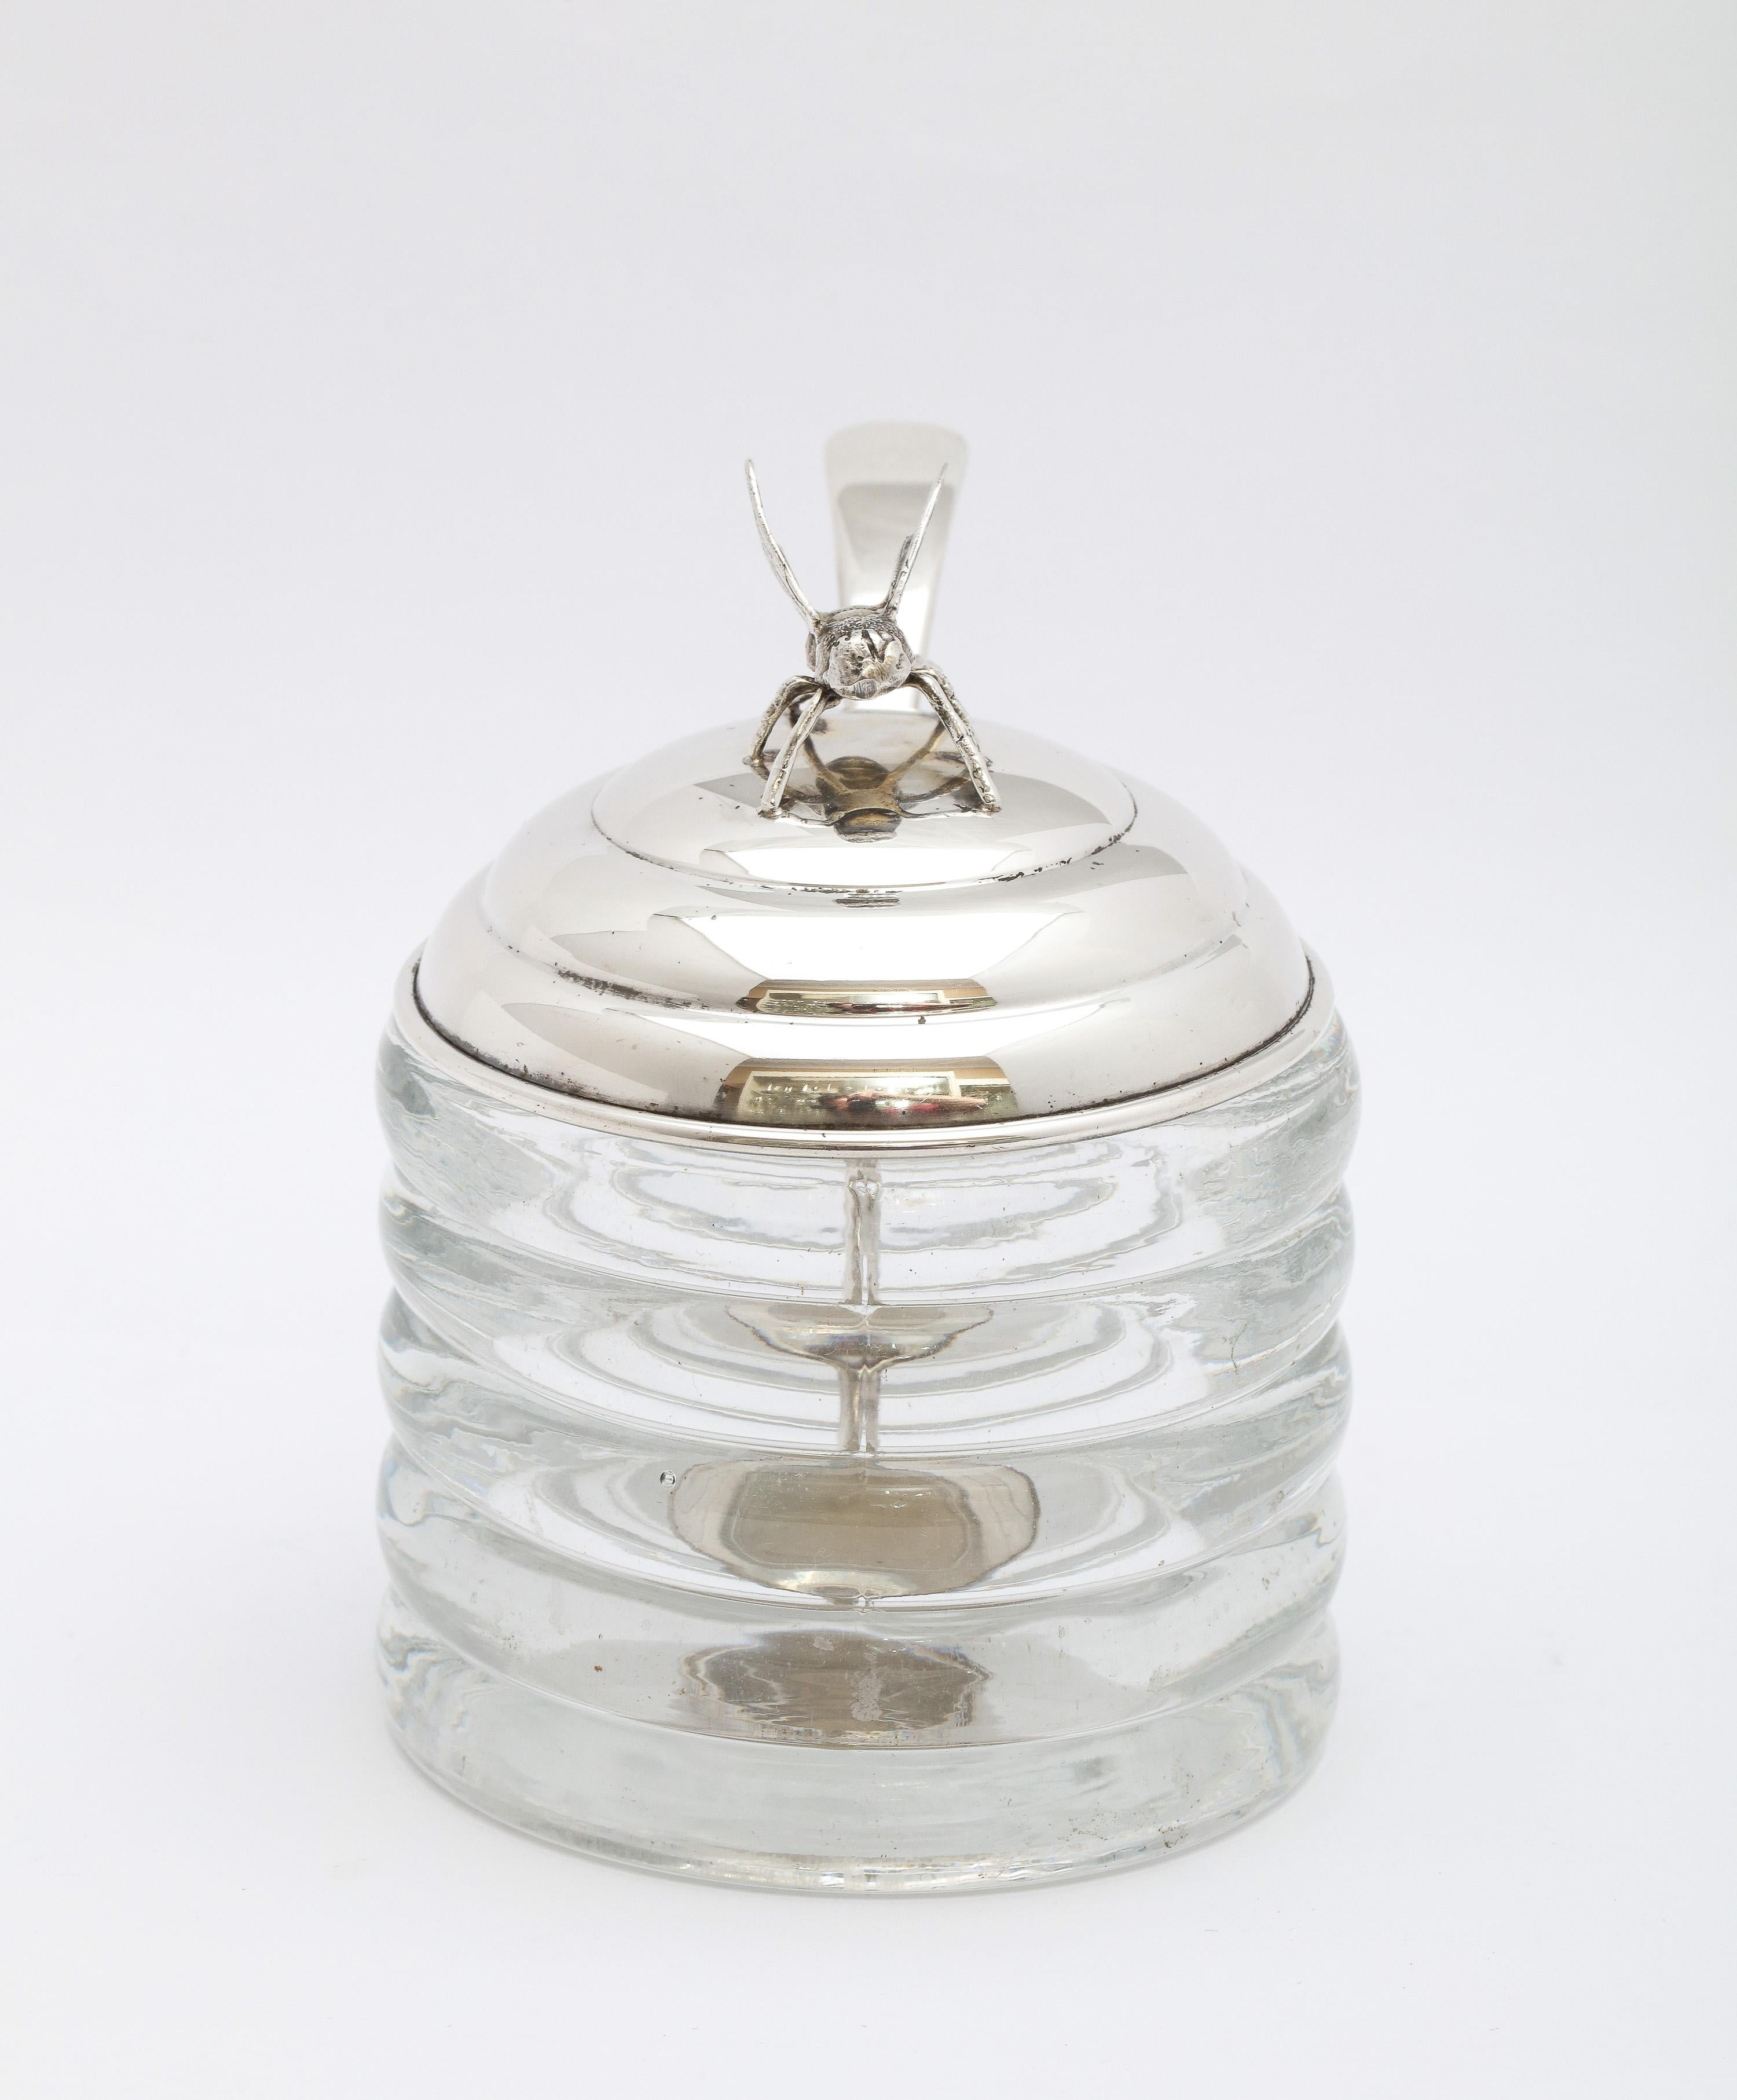 Art Deco Period Sterling Silver-Mounted Honey Jar with Original Honey Spoon 2